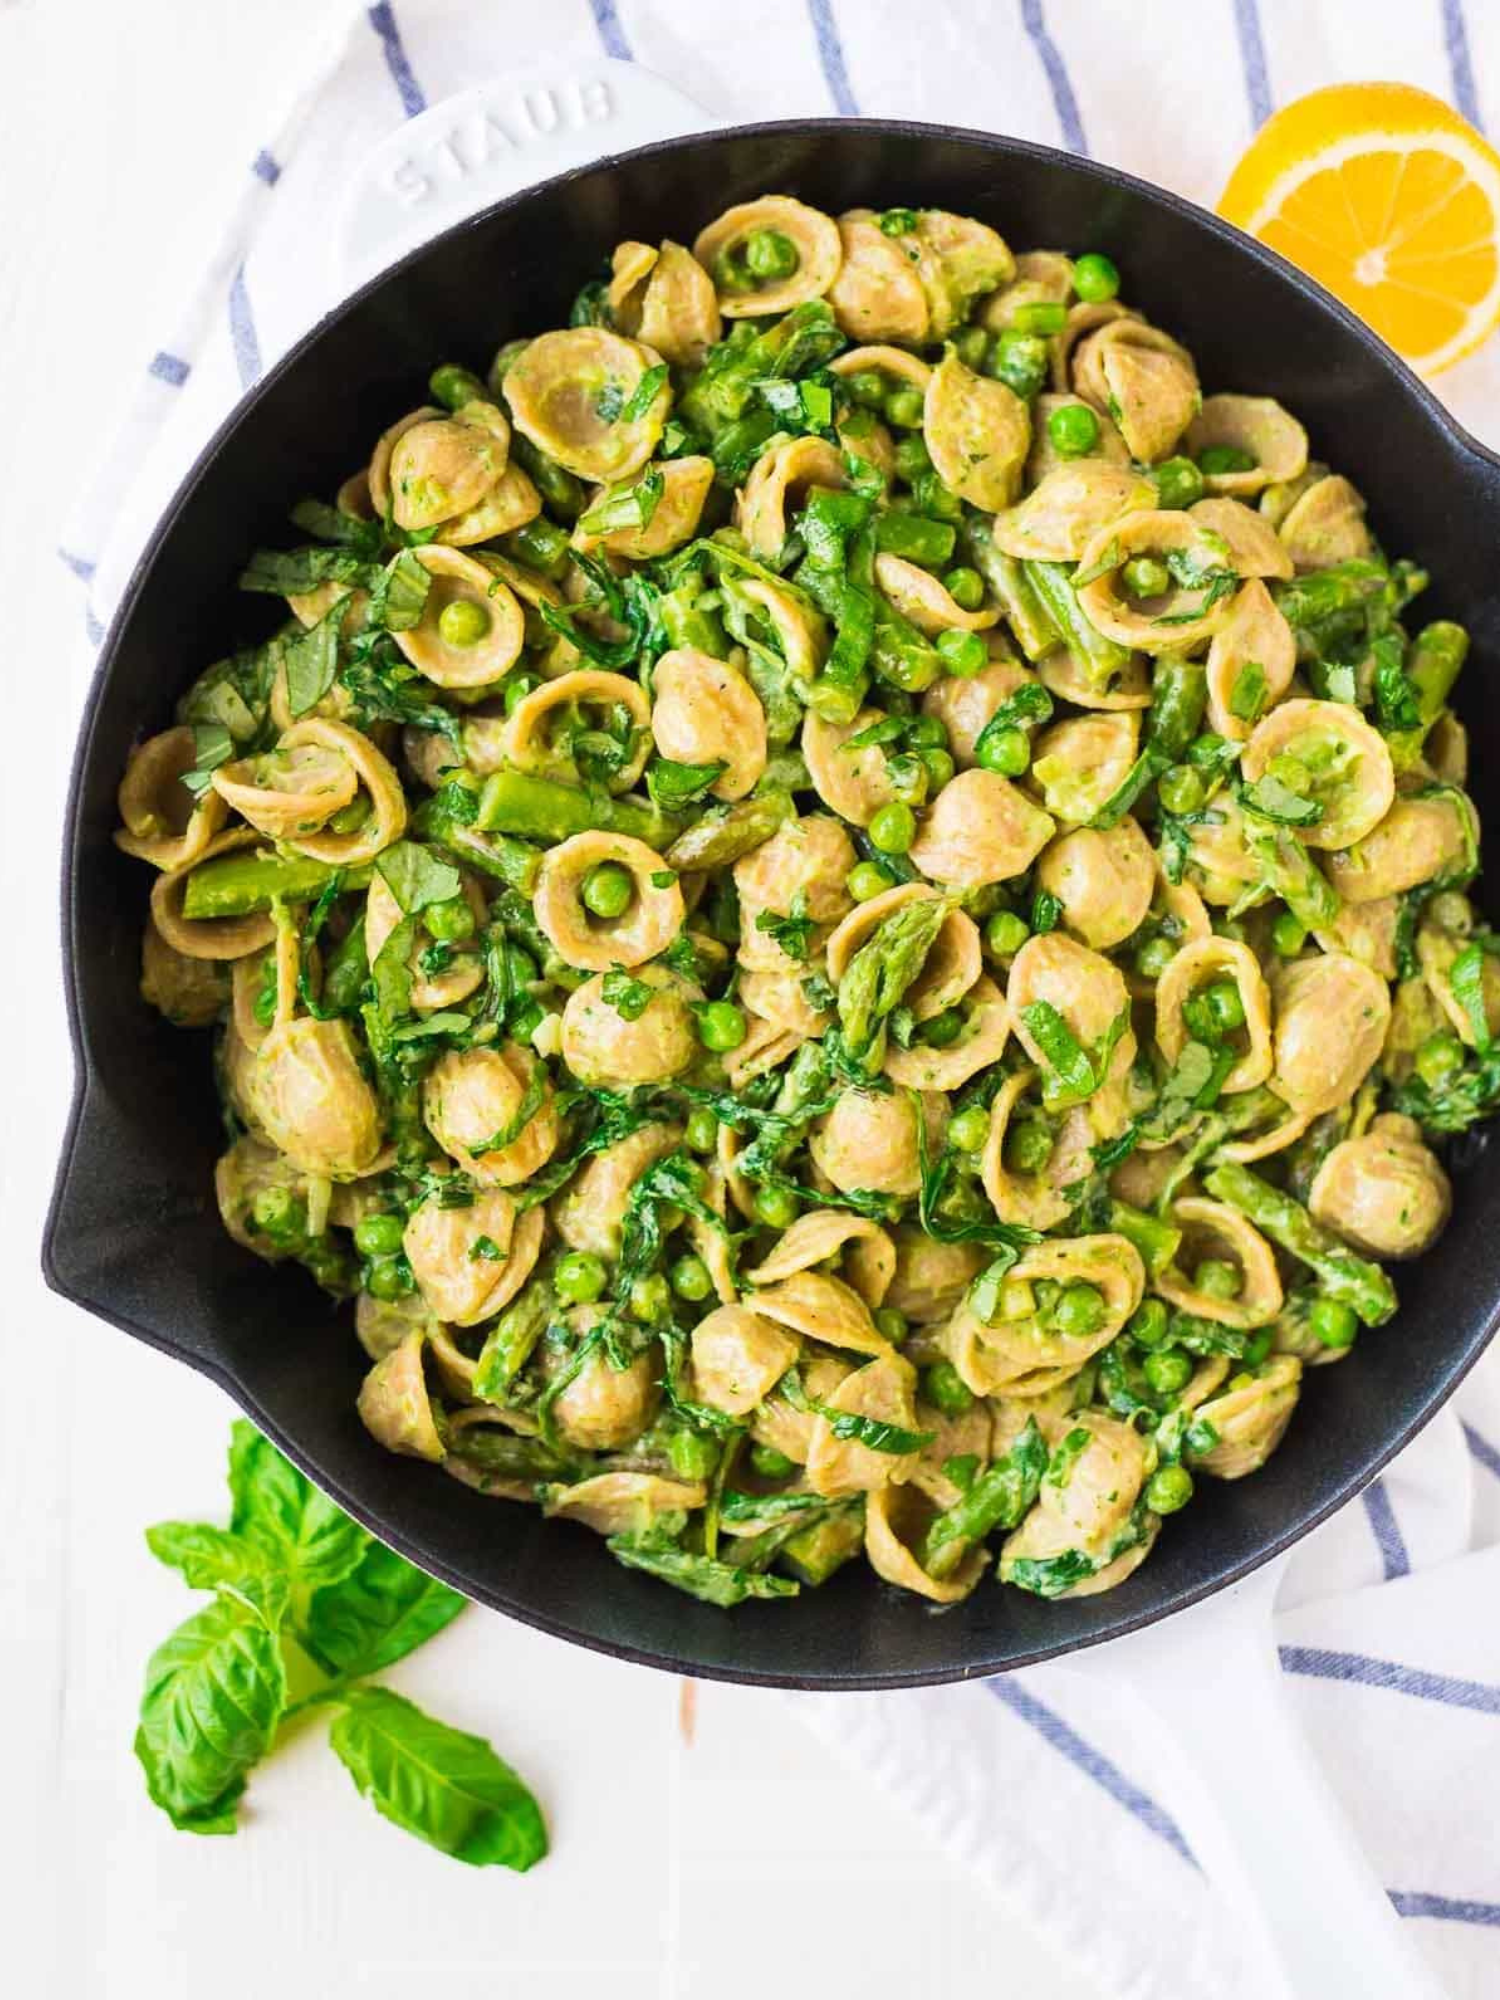 an iron skillet of avacado pasta with Fresh asparagus, herbs, green onions, and arugula make the dish feel light and bright.